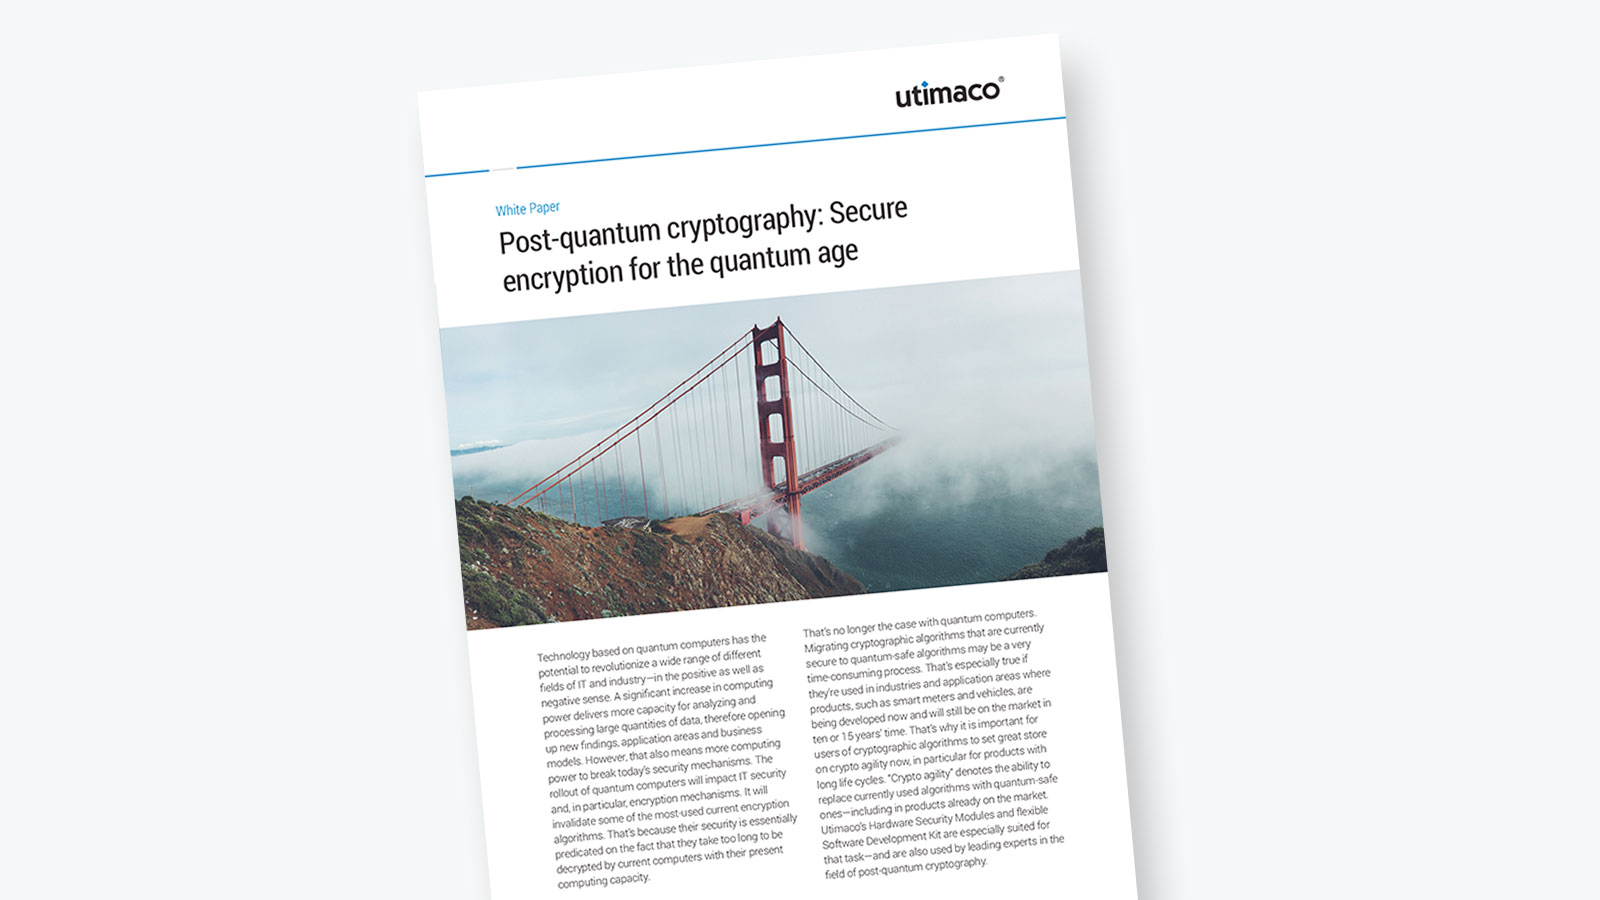 Post-quantum cryptography: Secure encryption for the quantum age